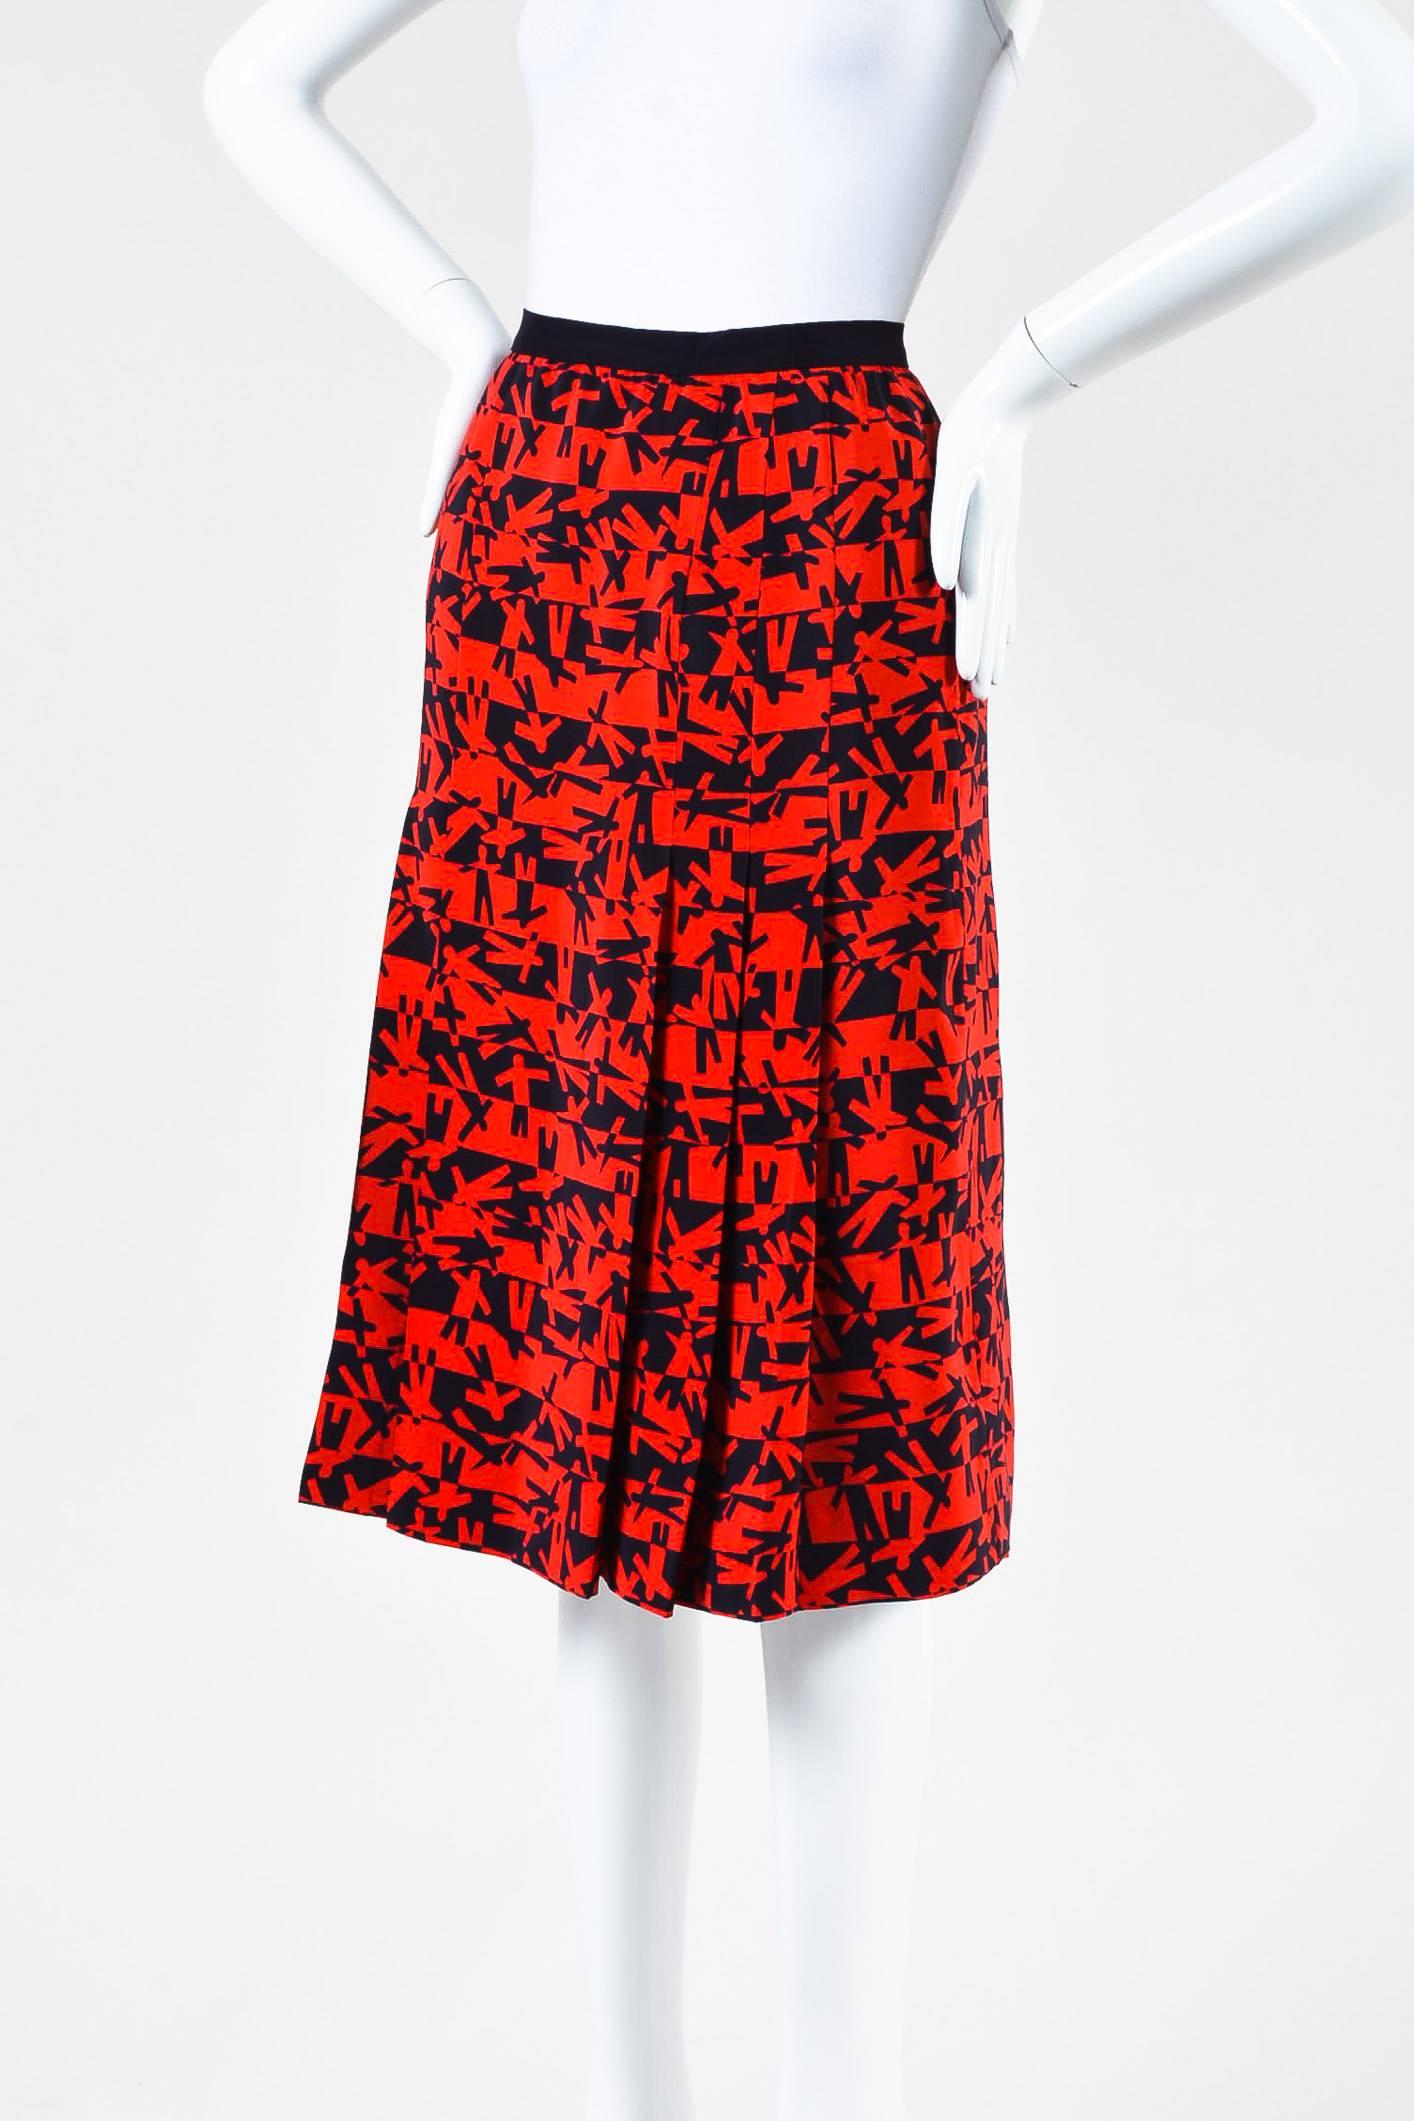 Red and black abstract patterned midi skirt by Chanel Boutique.  This skirt features pleating throughout, black waist band with back button closure, and gold tone back button.  Fully lined.

Condition details: Pre-owned.  This skirt is in great